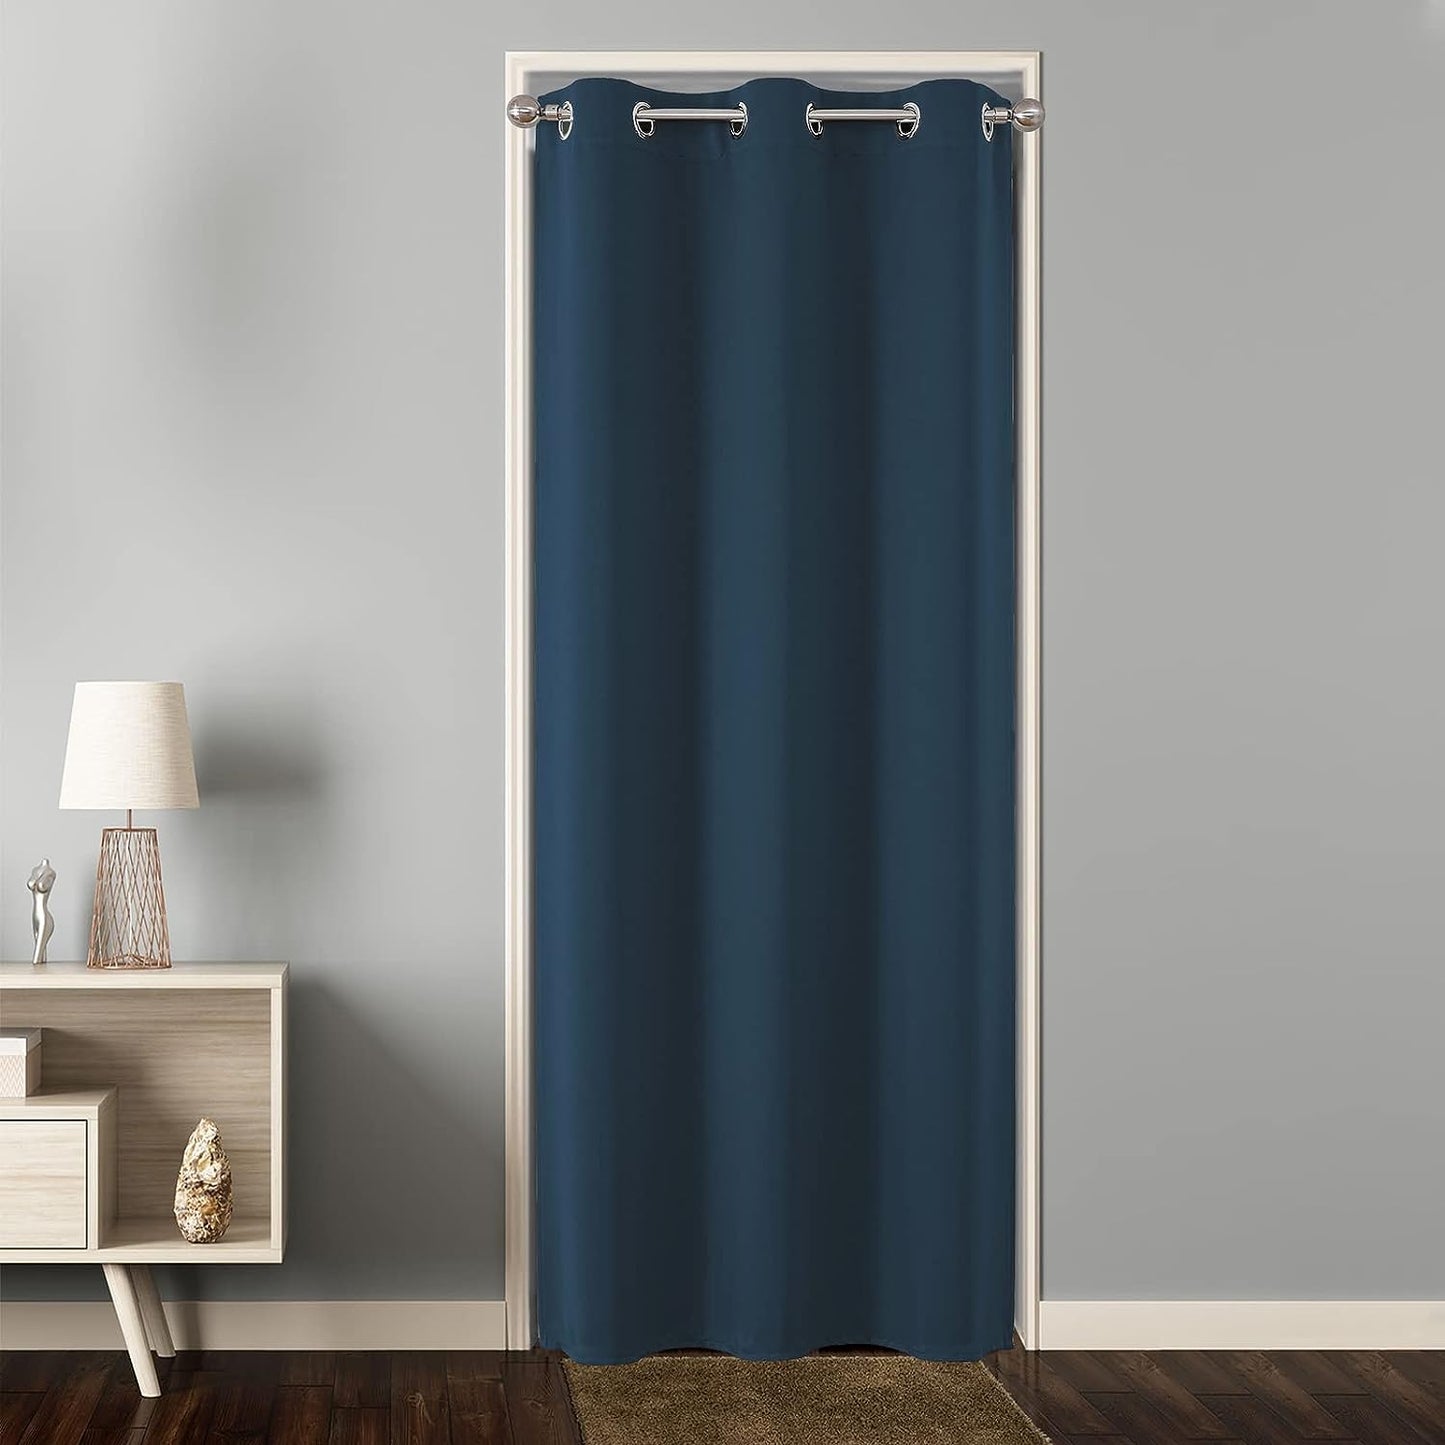 Joydeco Curtains for Sliding Glass Doors, Blackout Curtains 100 X 84 Inches, Extra Wide Curtains for Patio Sliding Door Living Room, Room Divider Curtains  Joydeco Navy Blue 40W X 78L Inch X 1 Panel 